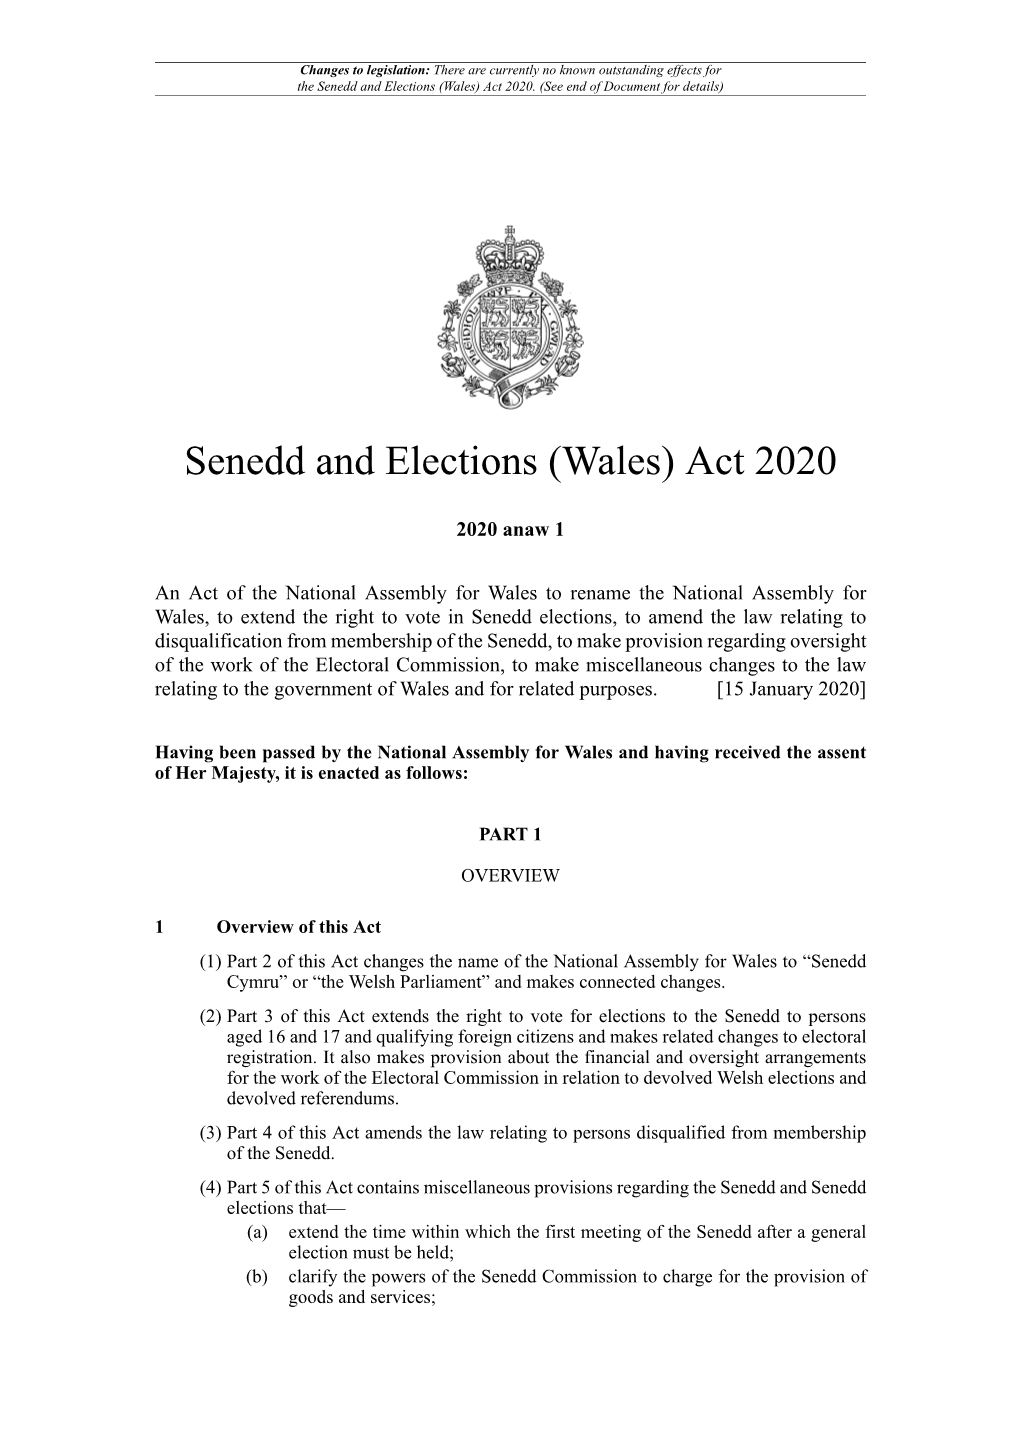 Senedd and Elections (Wales) Act 2020